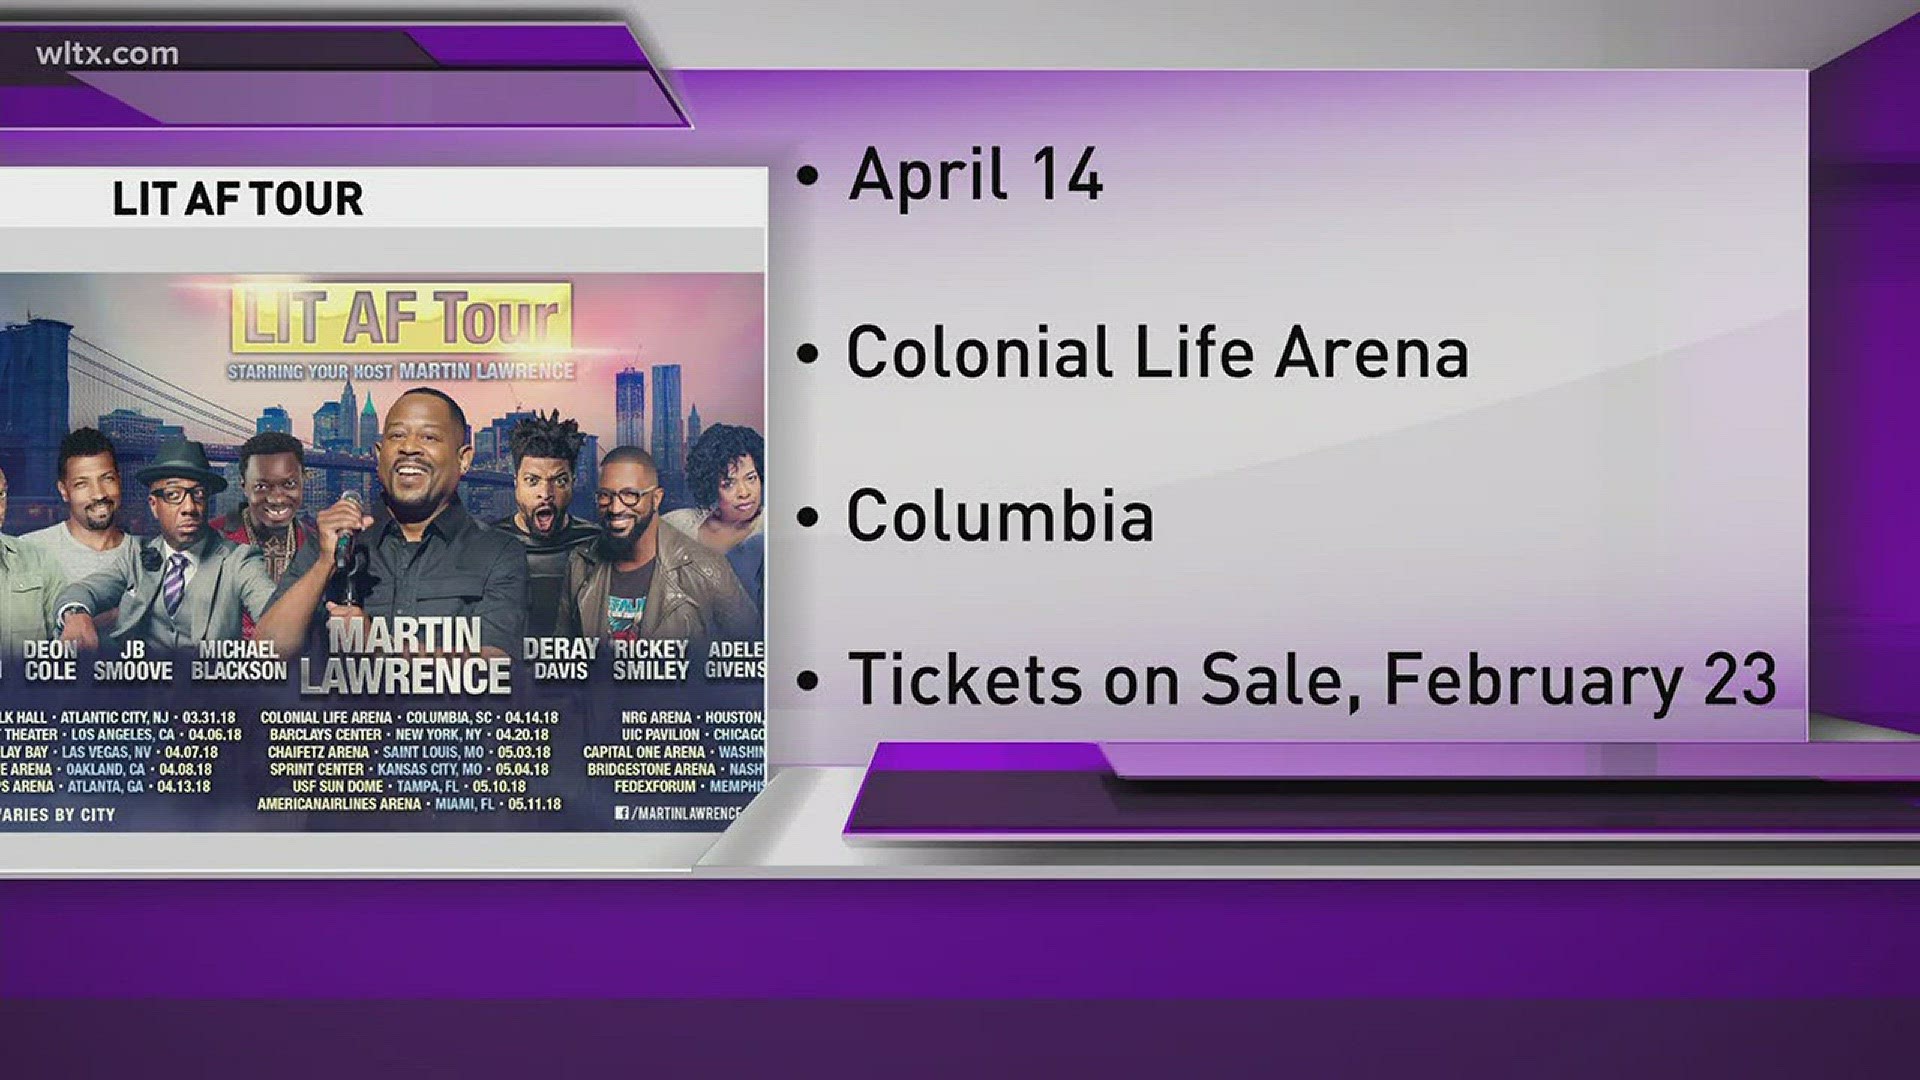 Martin will come to the Colonial Life Arena, and will be joined by other comics, including Rickey Smiley.